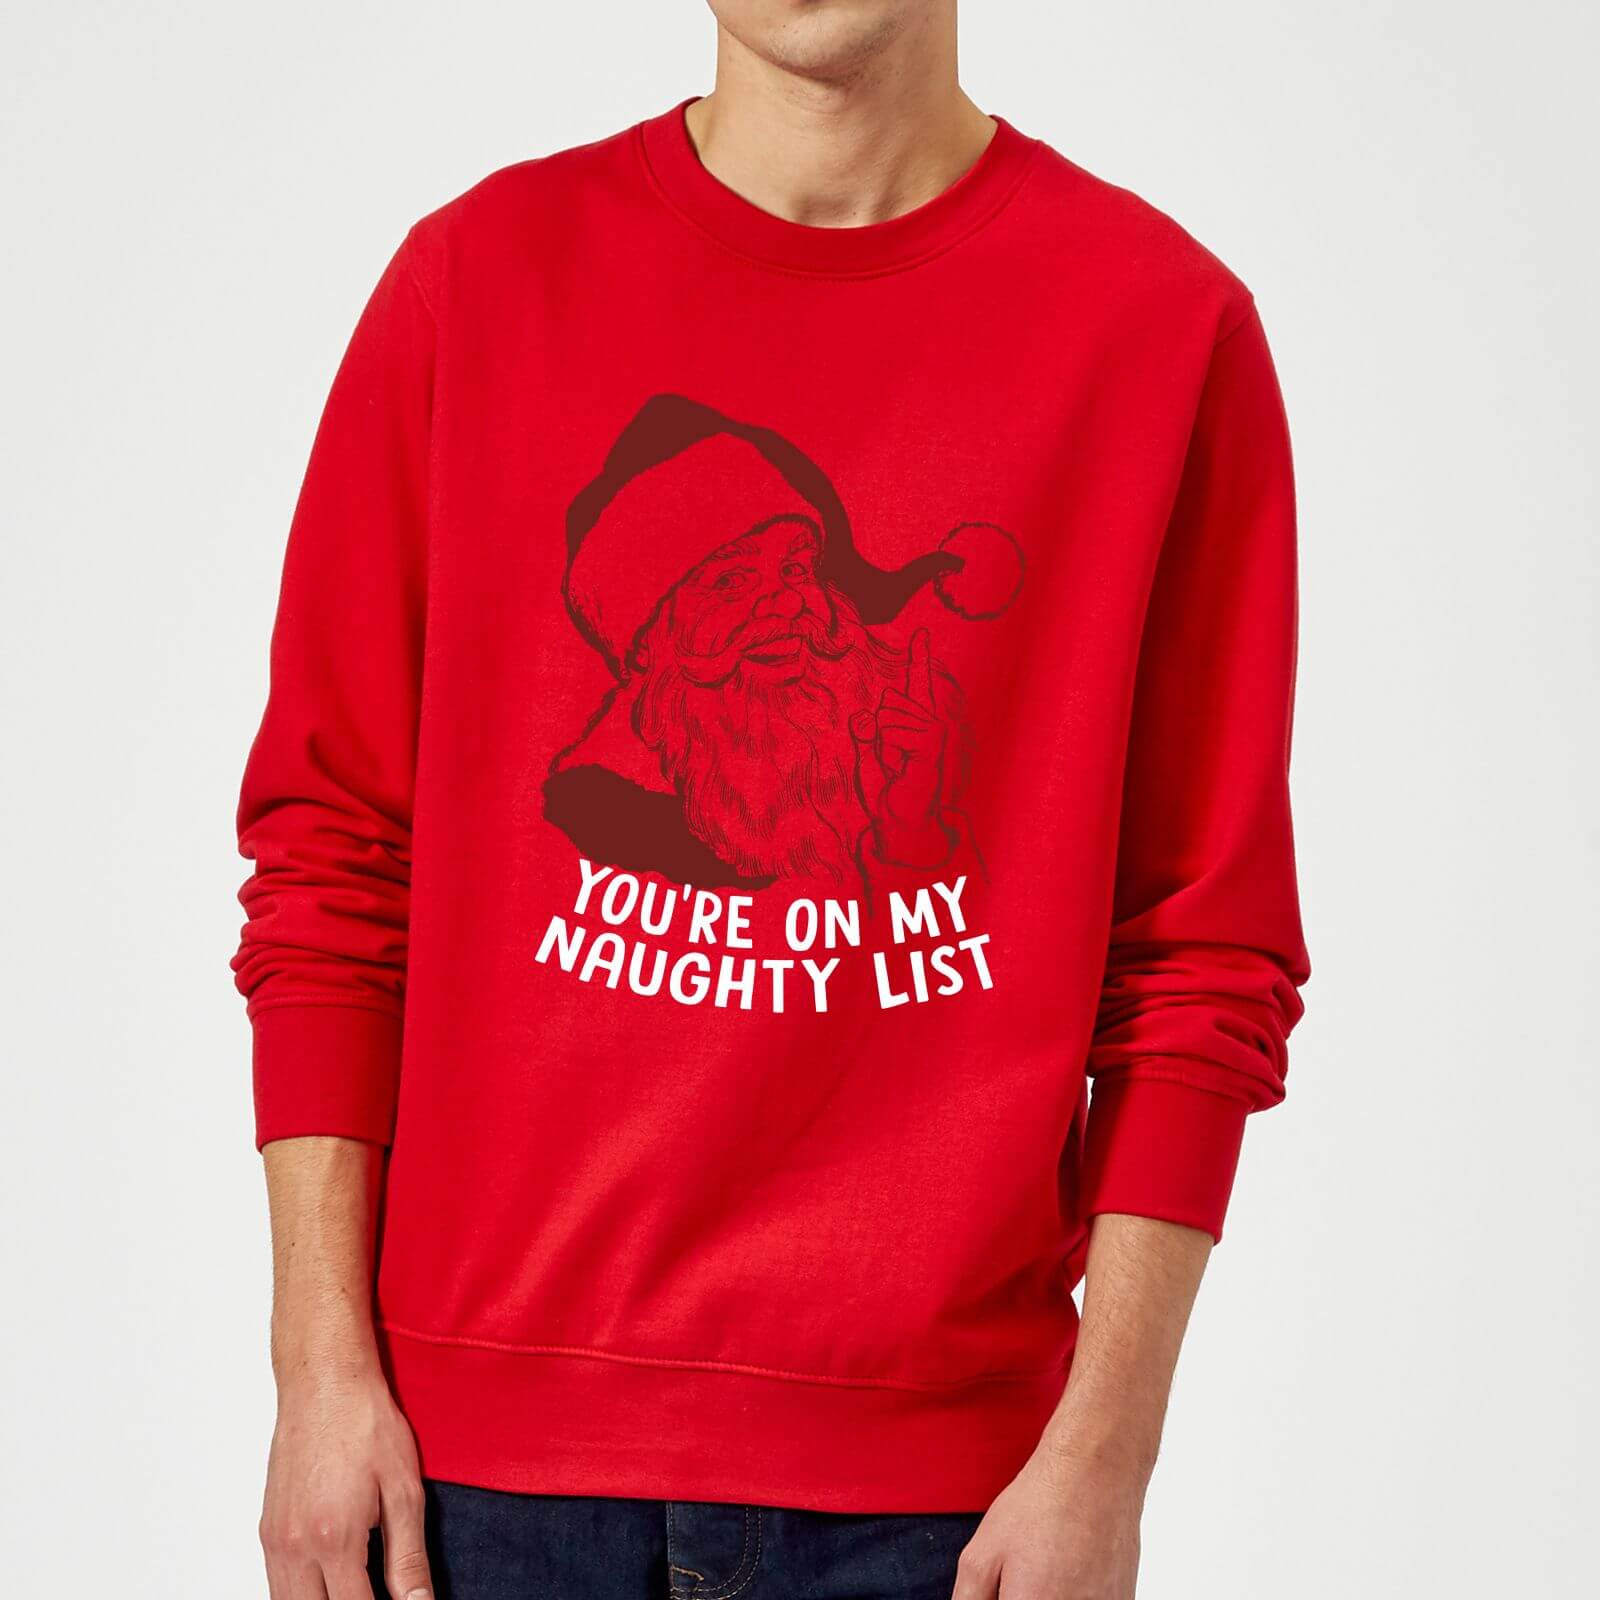 You're On My Naughty List Sweatshirt - Red - M - Red